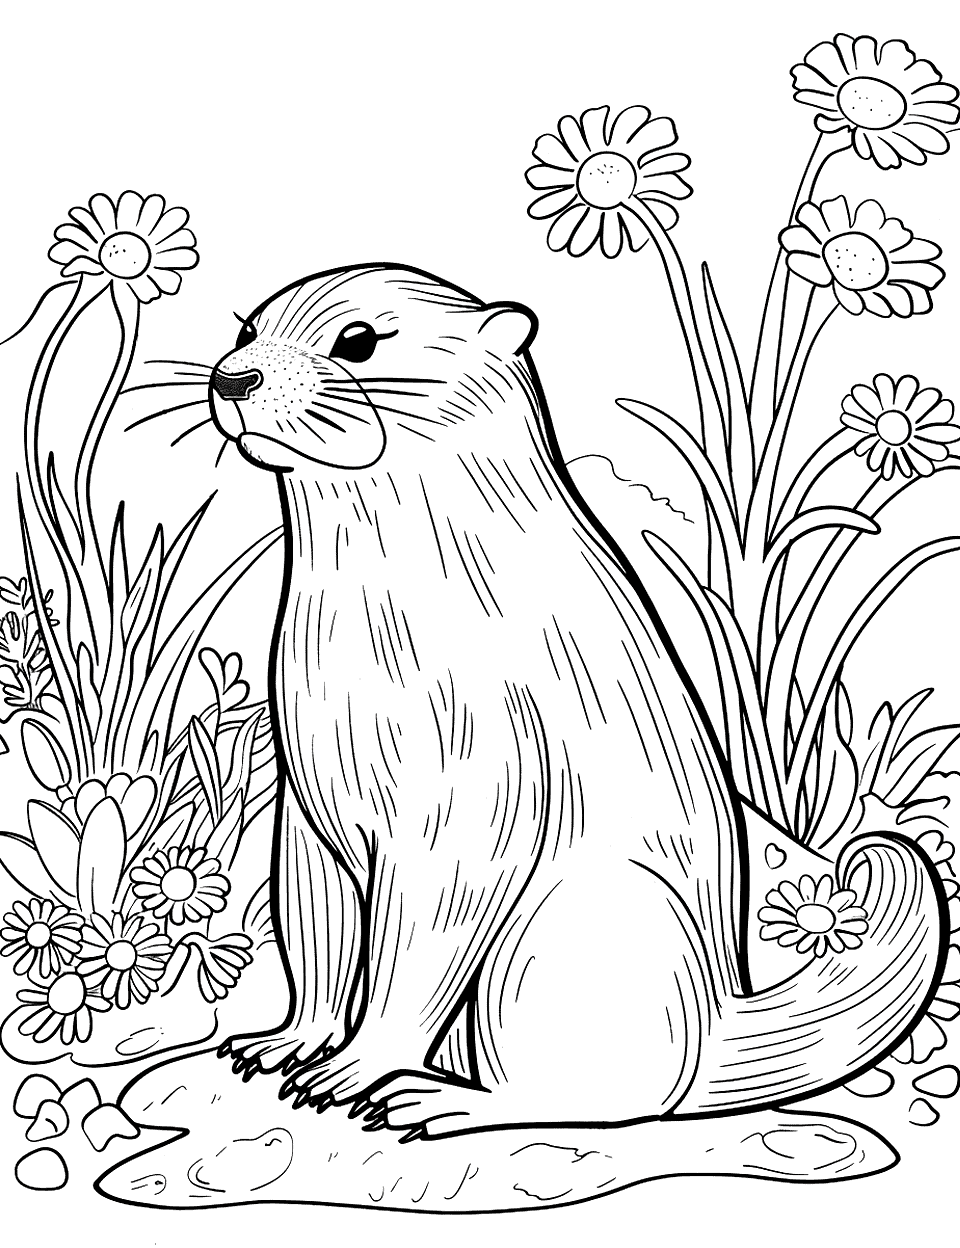 Otter in a Flower Garden Coloring Page - An otter wandering through a vibrant garden full of flowers.